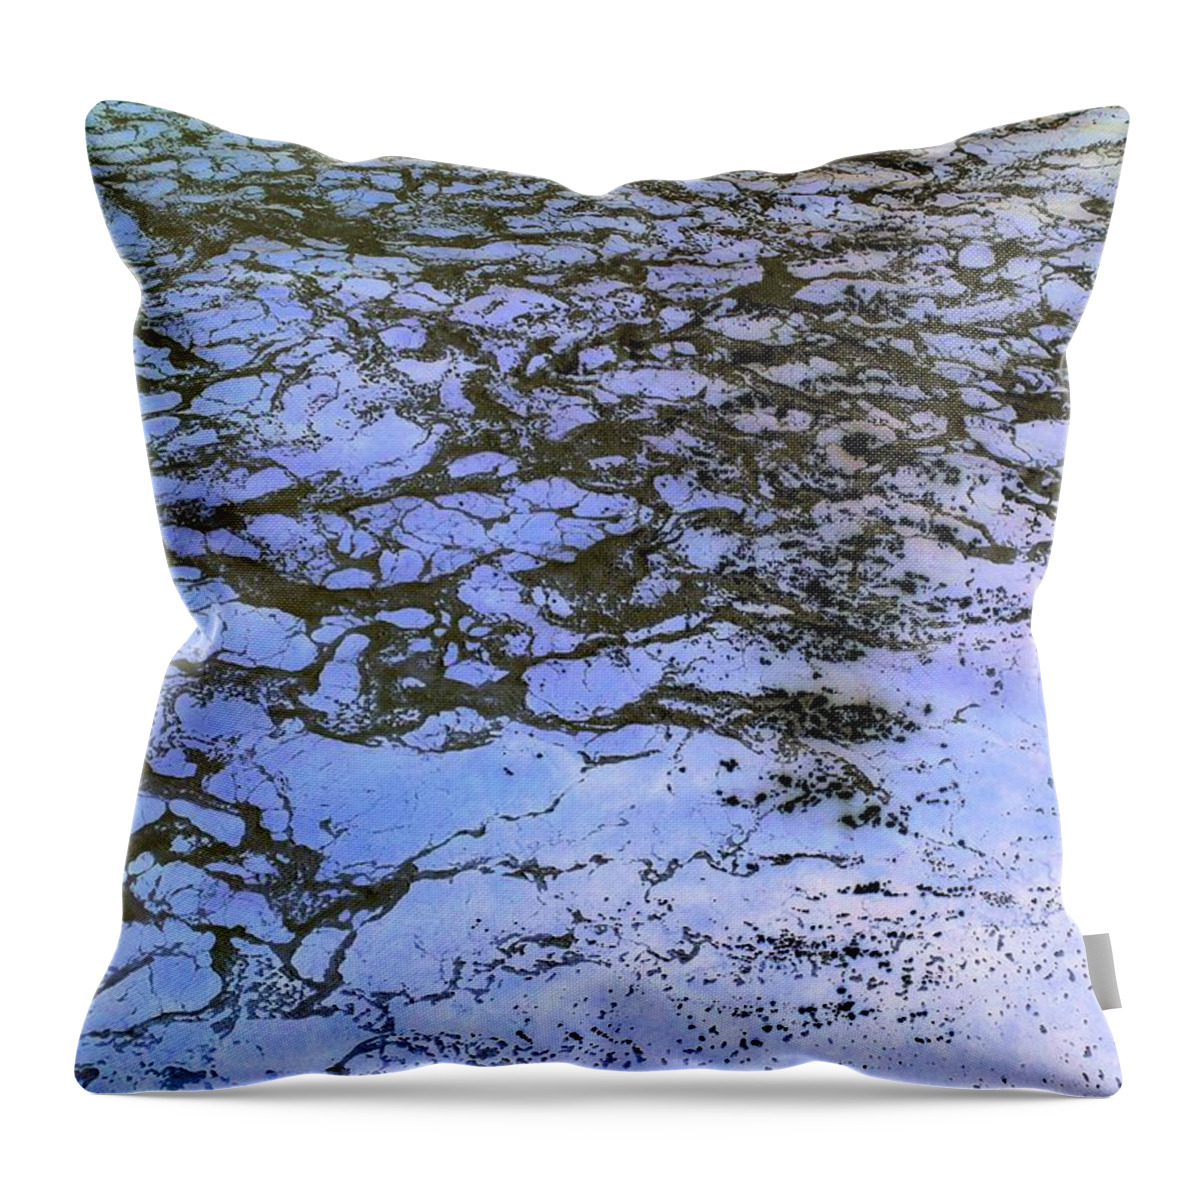 Sea Throw Pillow featuring the photograph Sea Foam At Rest by J R Yates